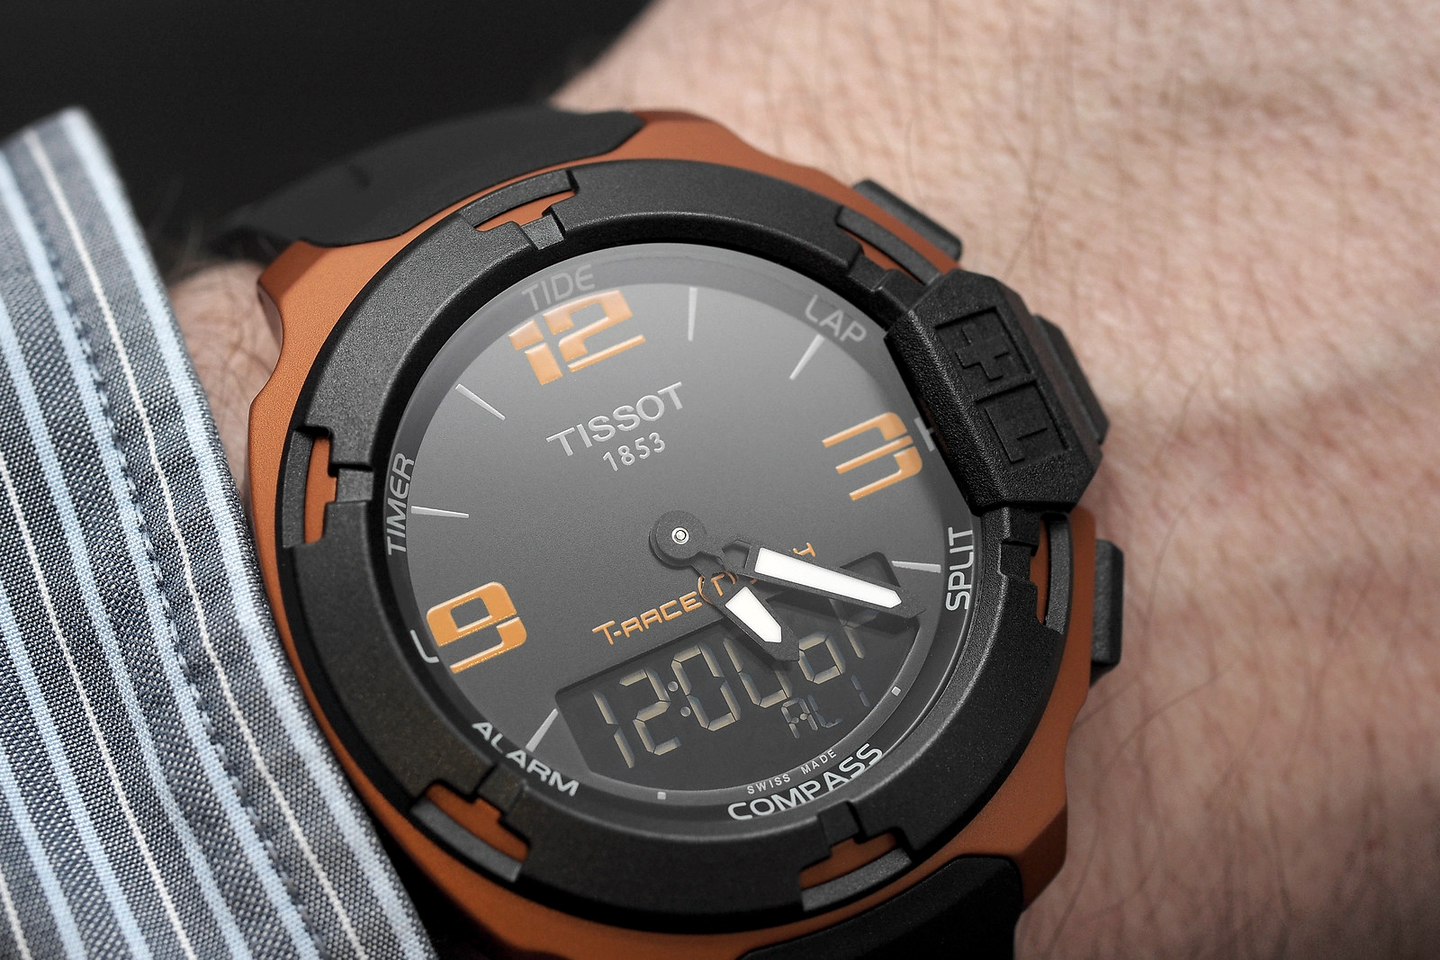 Introducing the Tissot T-Race Aluminum and T-Touch Expert Solar